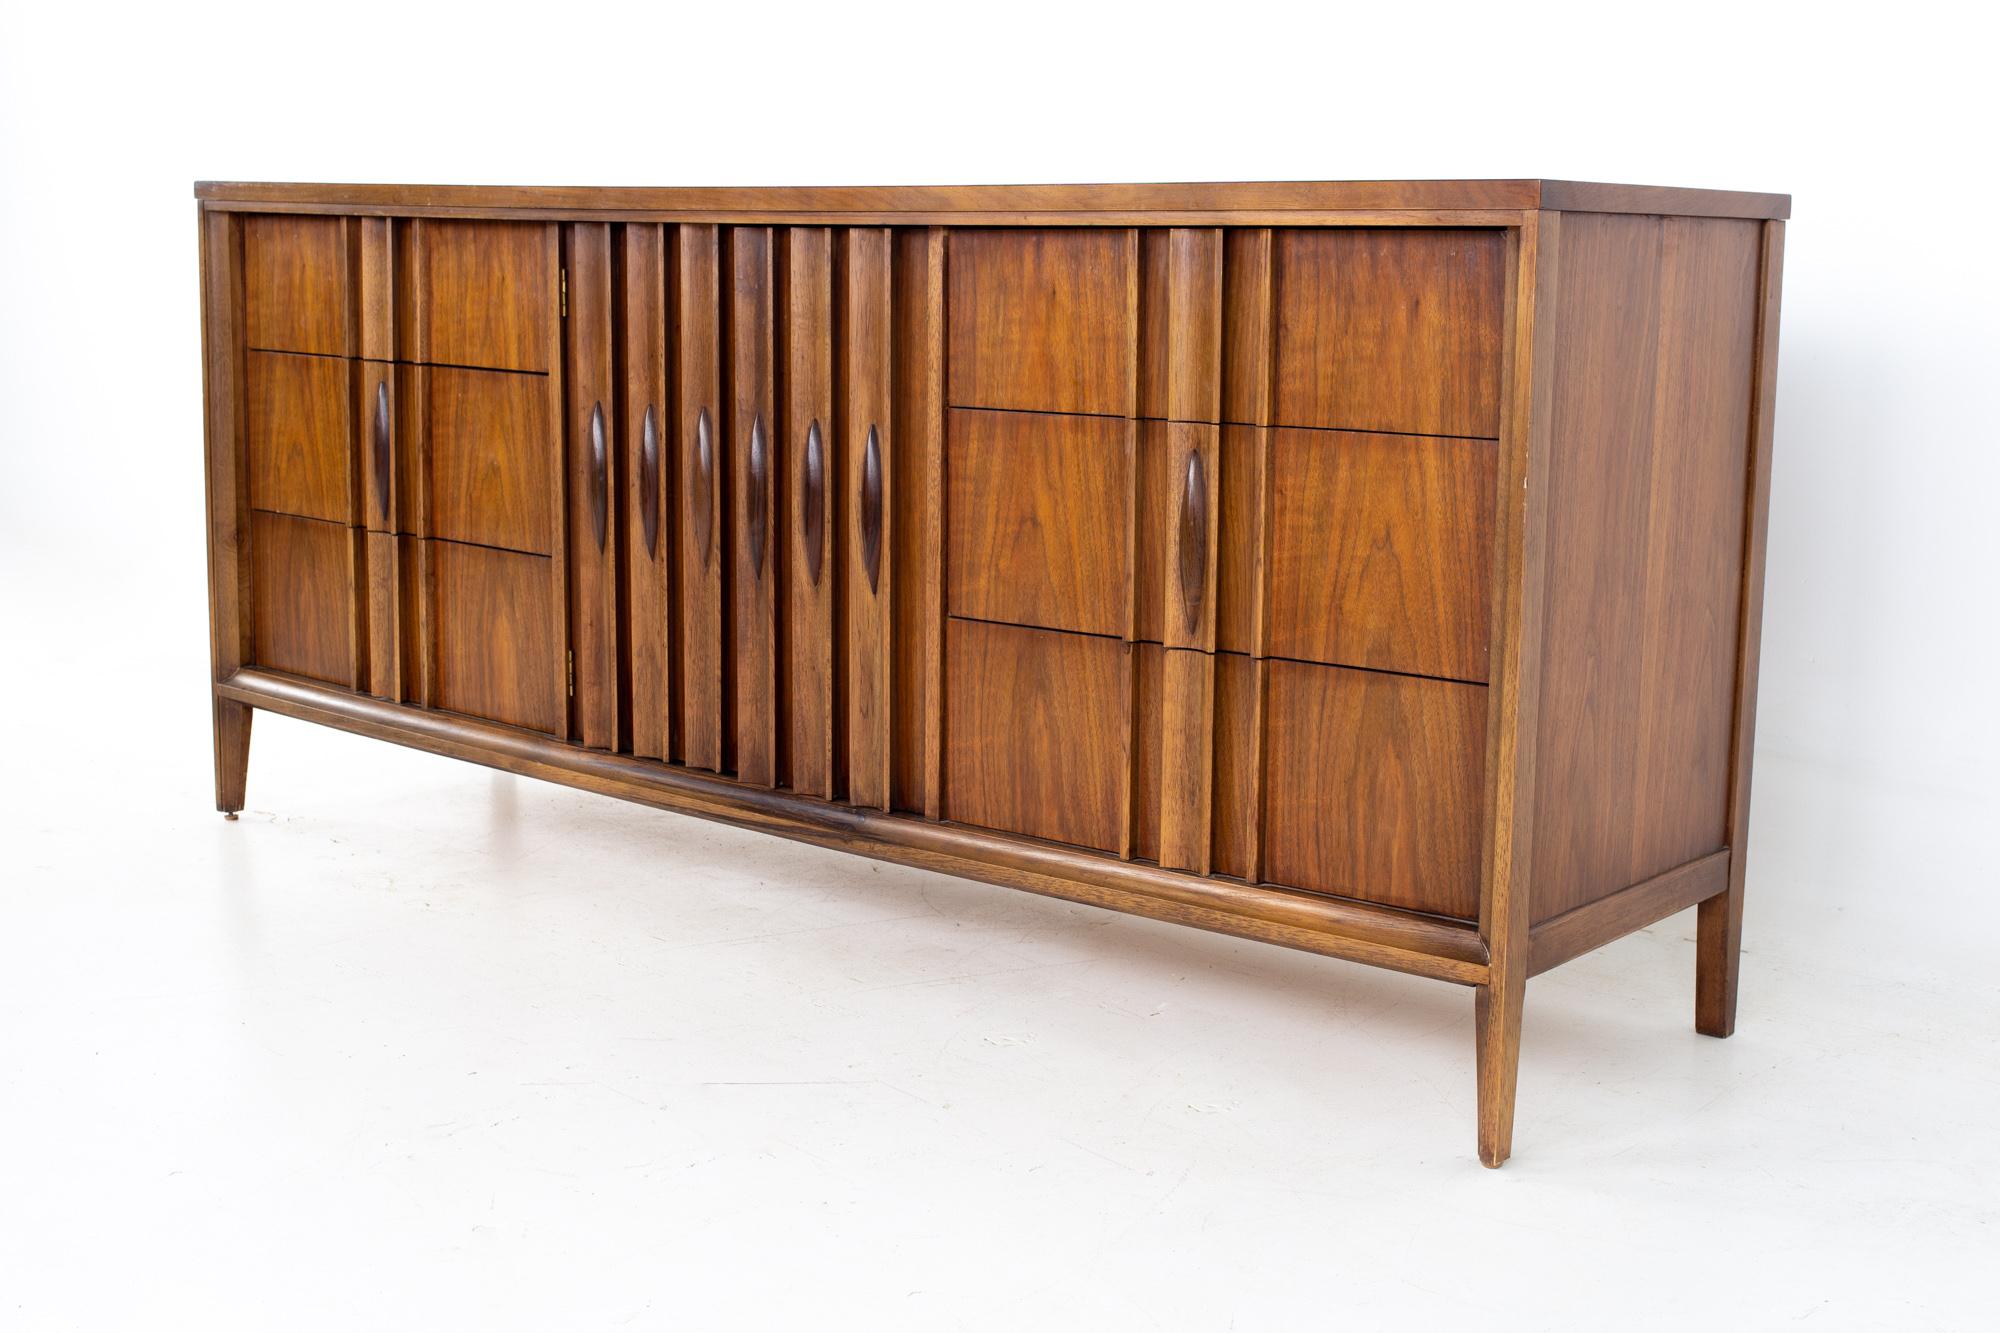 Thomasville Brutalist mid century walnut 9 drawer lowboy dresser.
Dresser measures: 74 wide x 19 deep x 32 inches high

All pieces of furniture can be had in what we call restored vintage condition. That means the piece is restored upon purchase